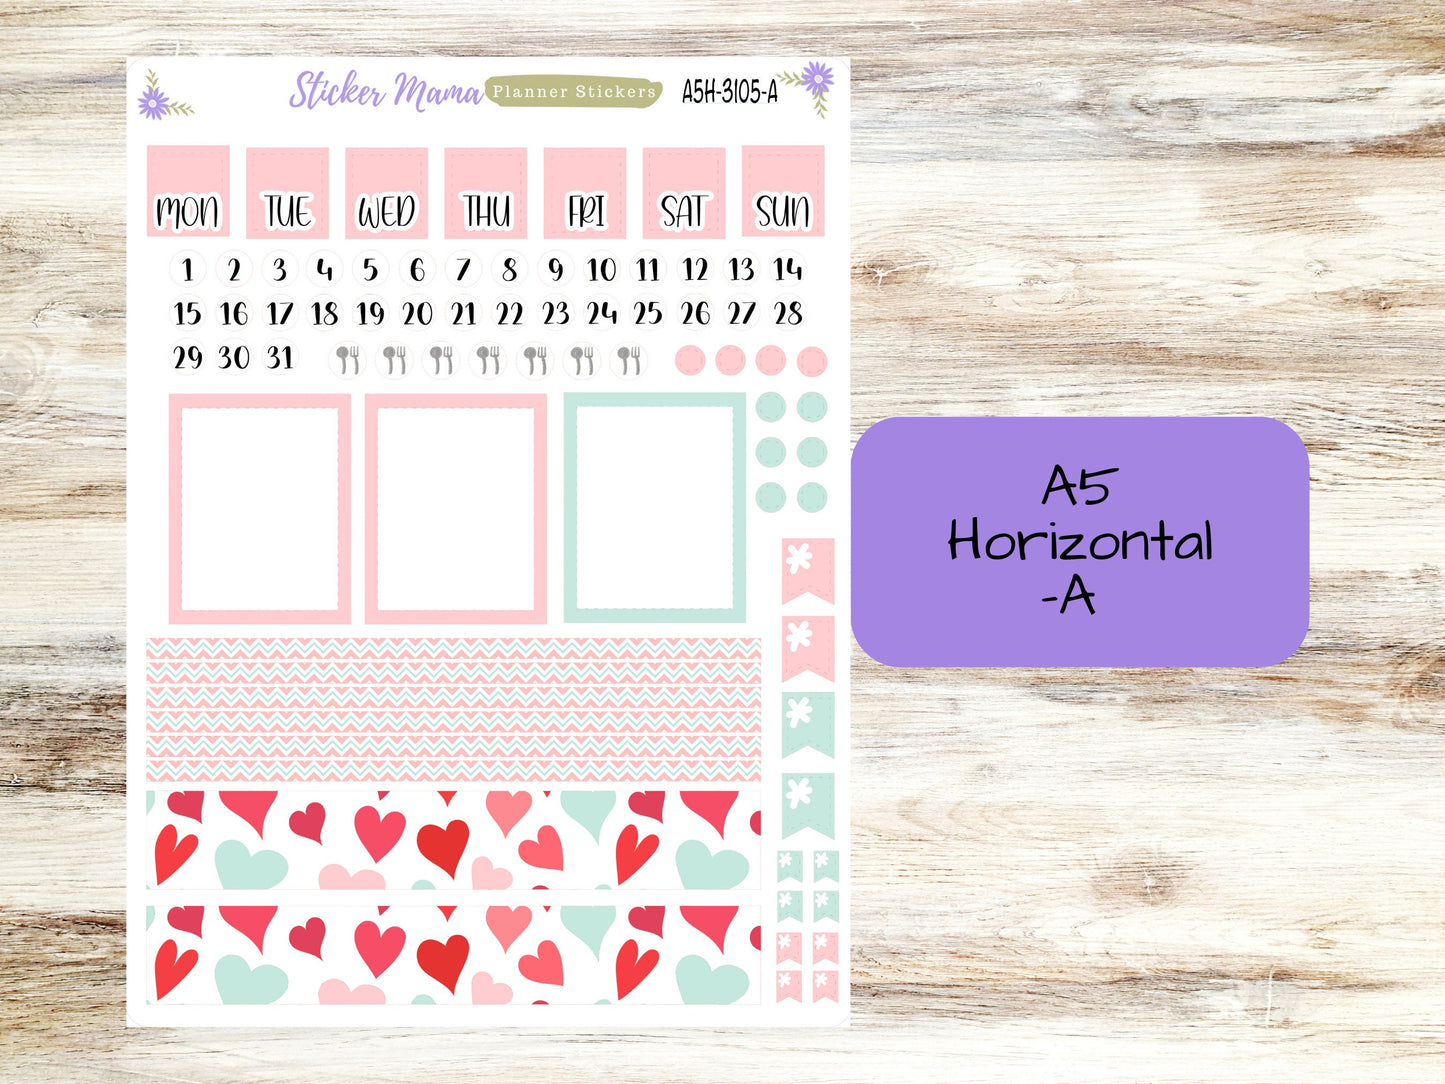 A5 Horizontal || #3105 || Hello, Love! || A5 Weekly Kit || Planner Stickers || Erin Condren A5 Horizontal Weekly Kit